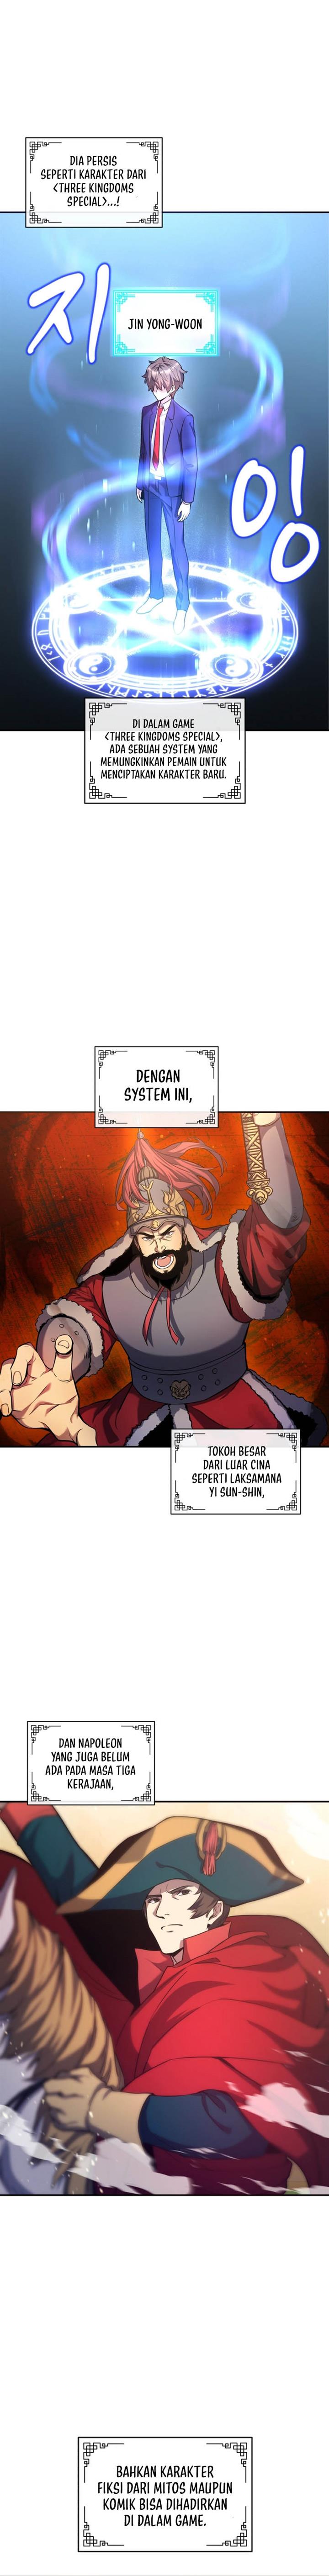 The Romance of The Three Kingdoms Chapter 8